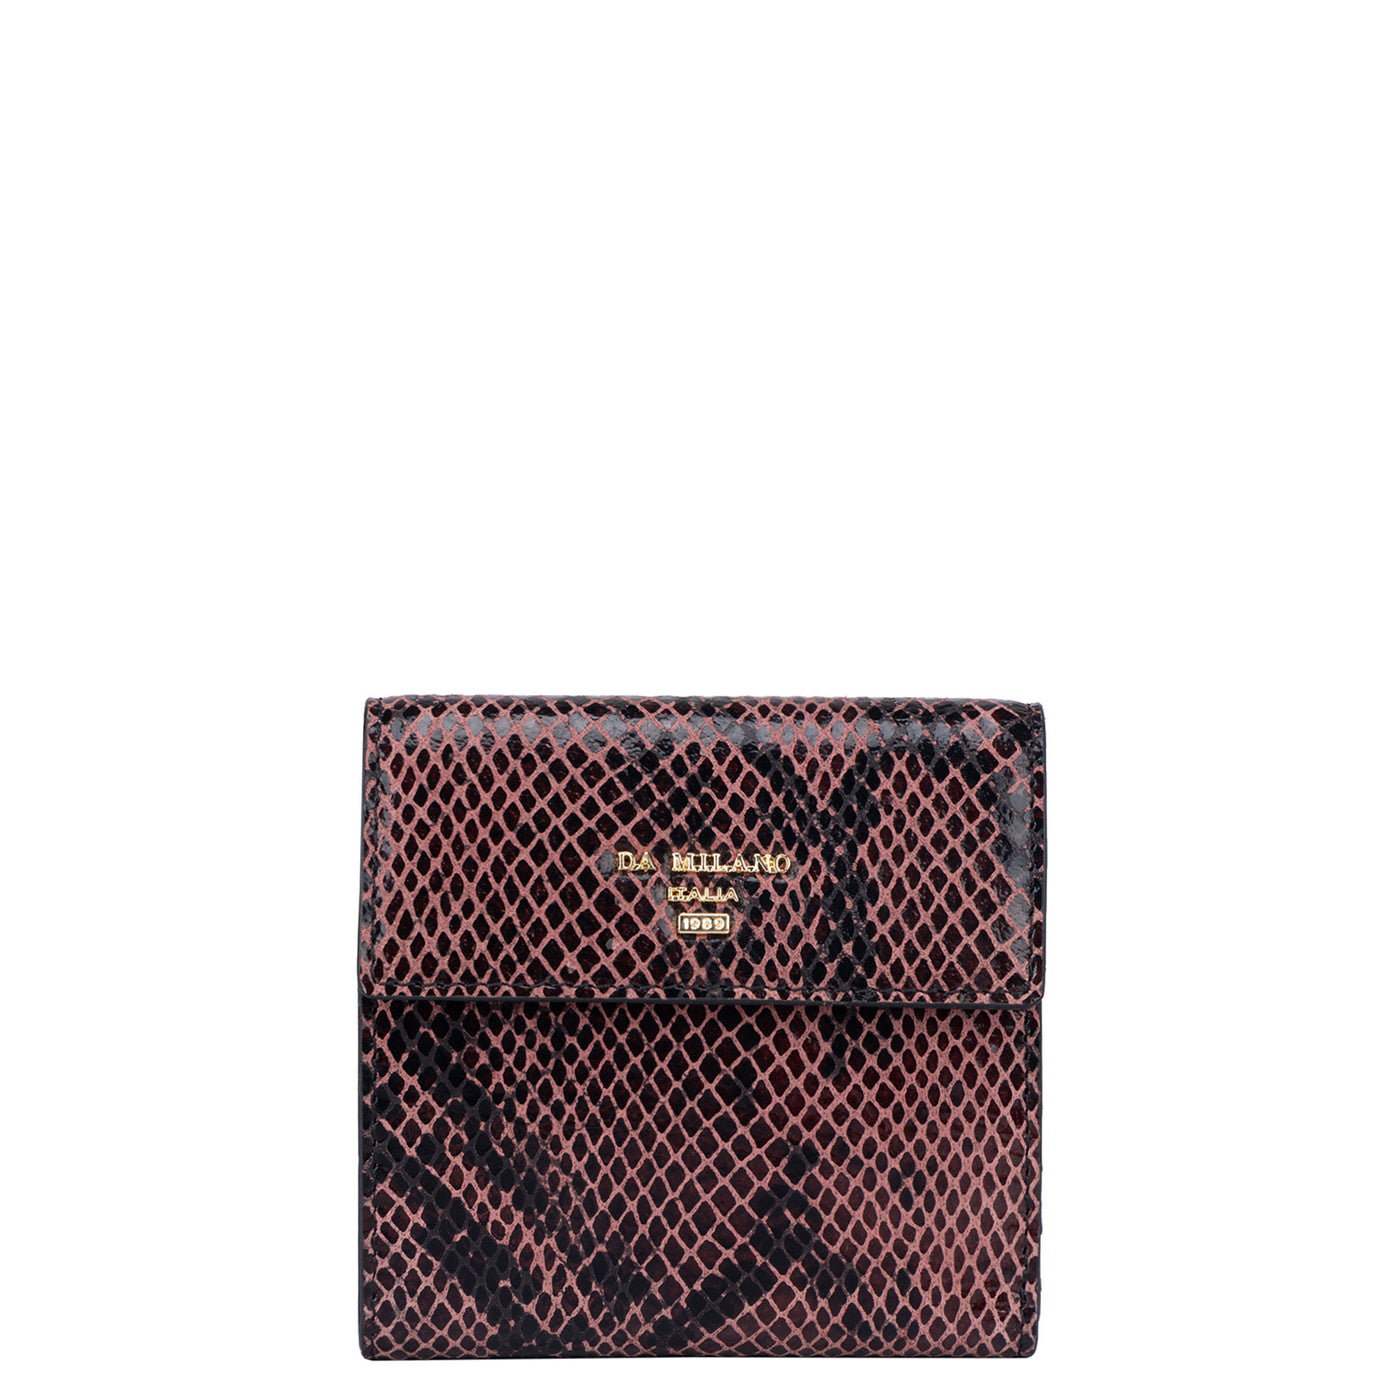 Snake Leather Ladies Wallet - Berry